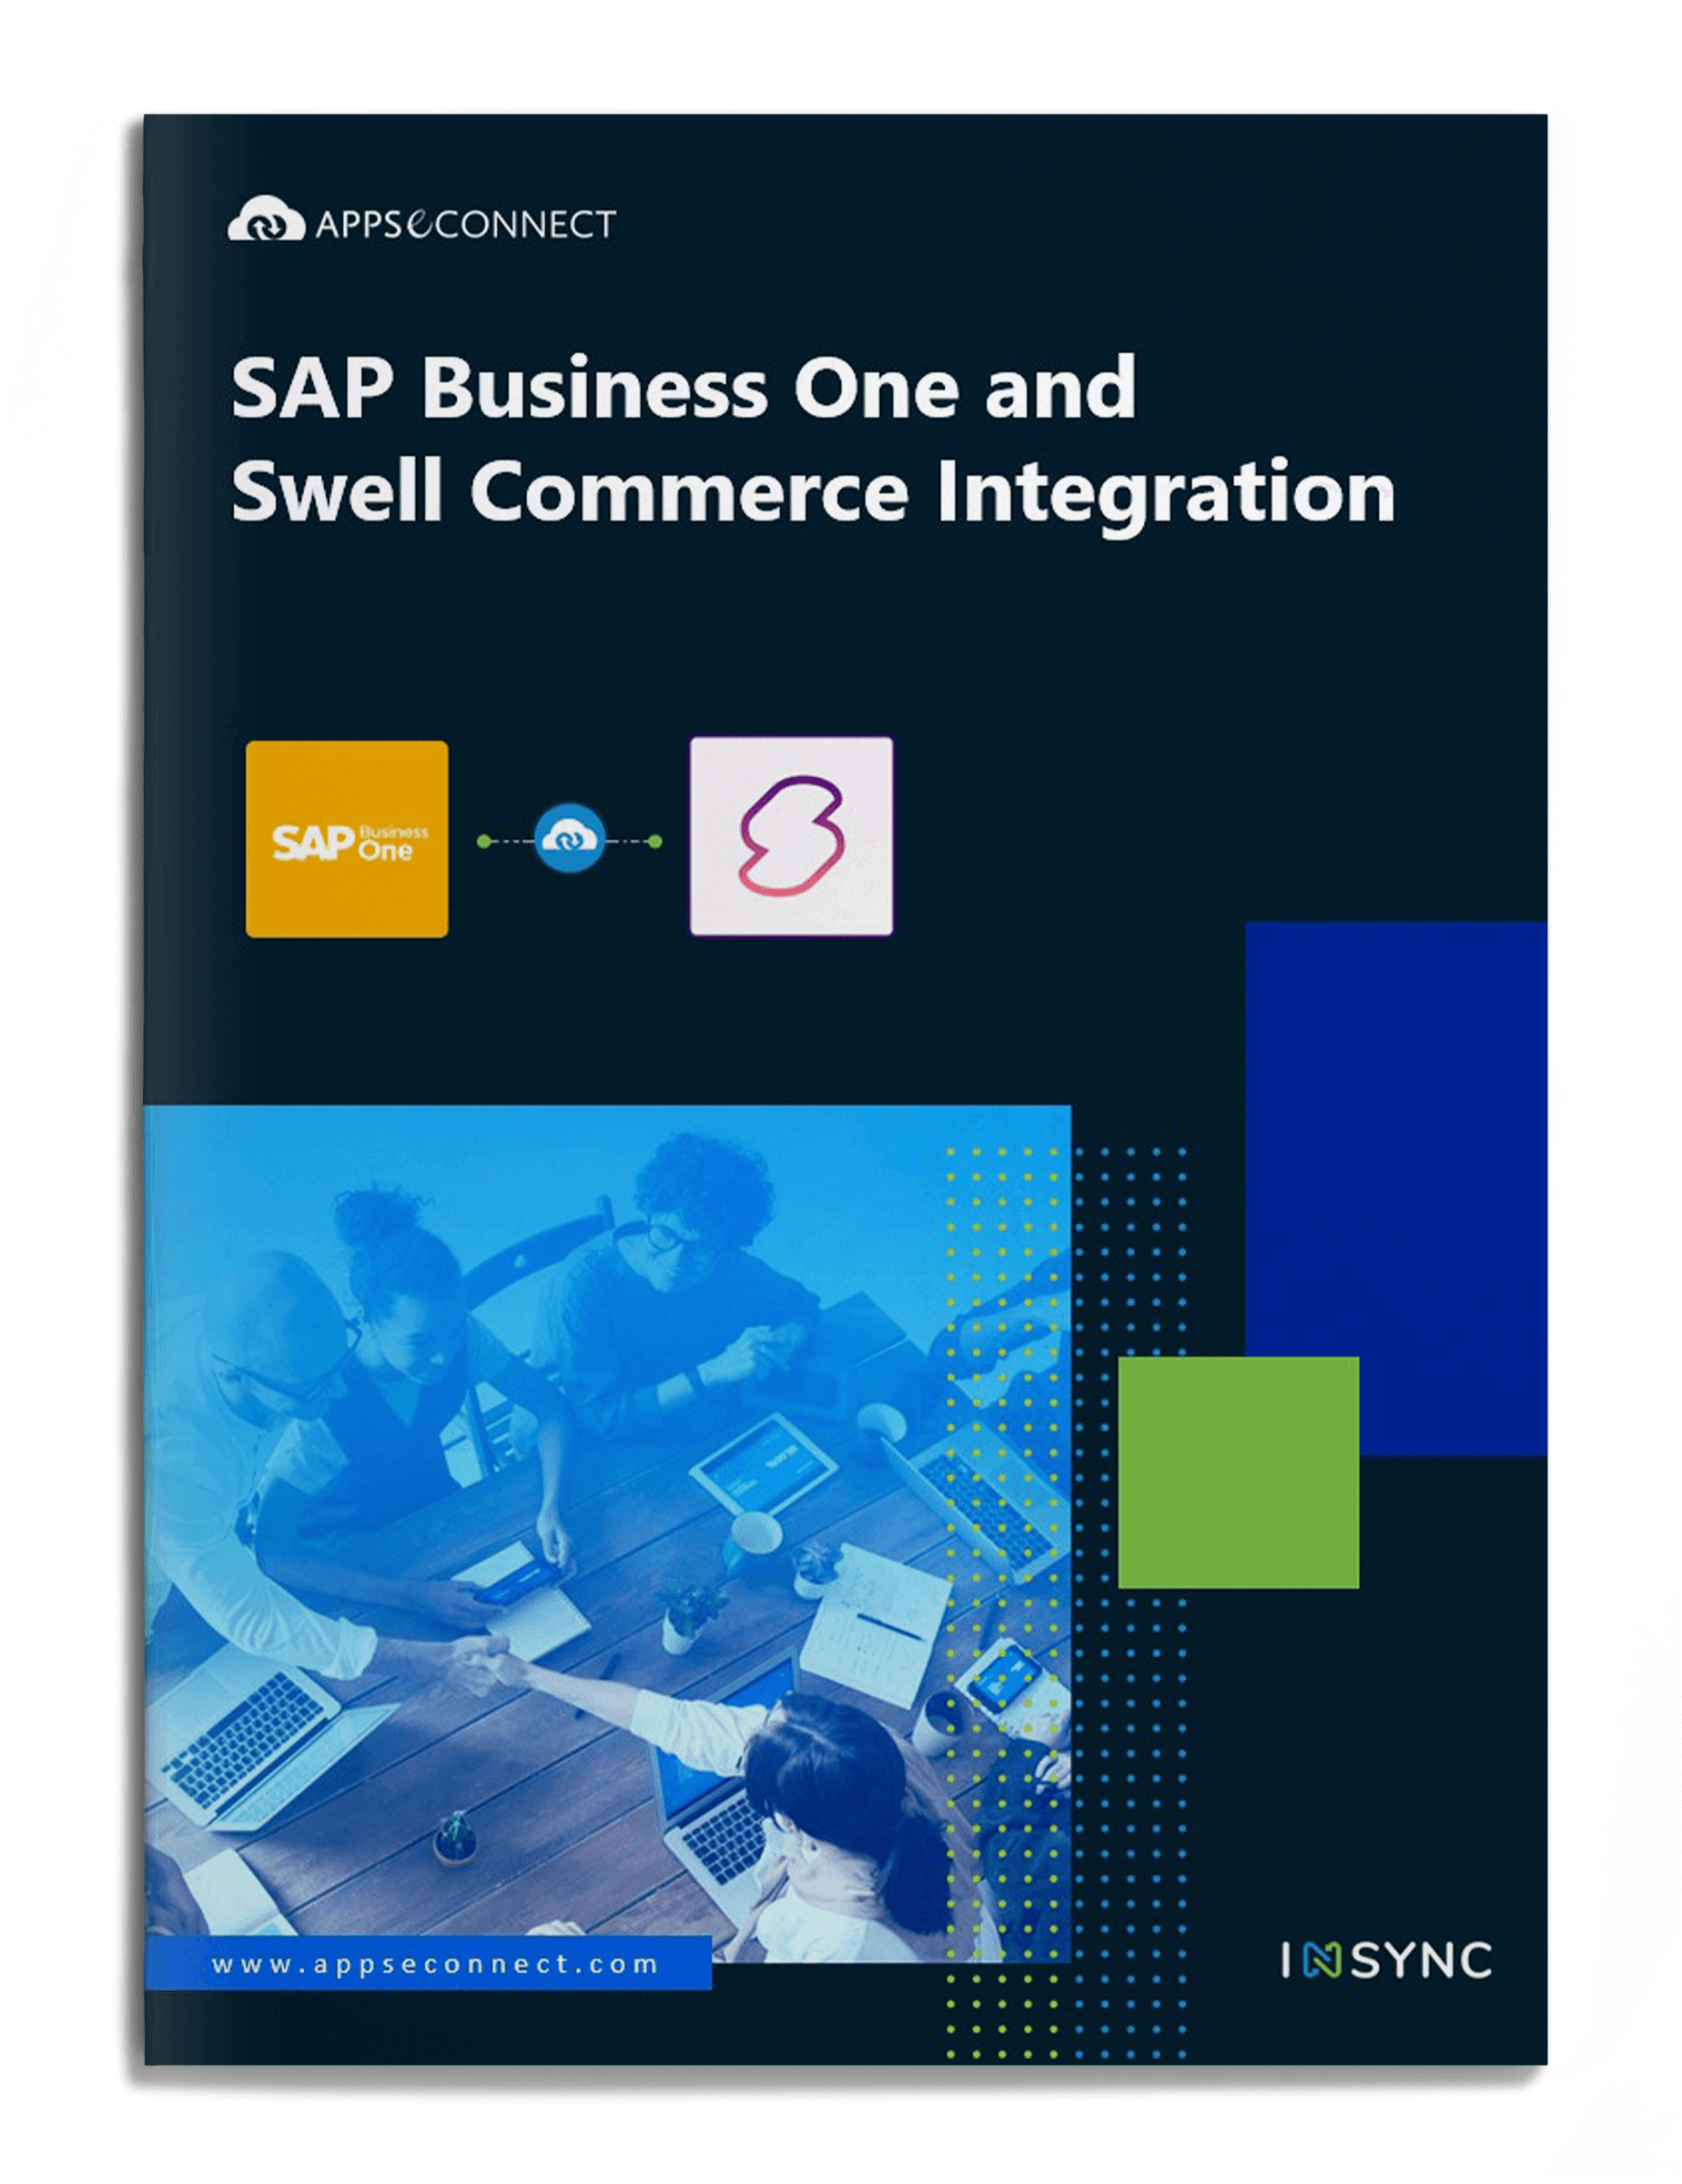 sap-business-one-swell-integration-brochure-cover